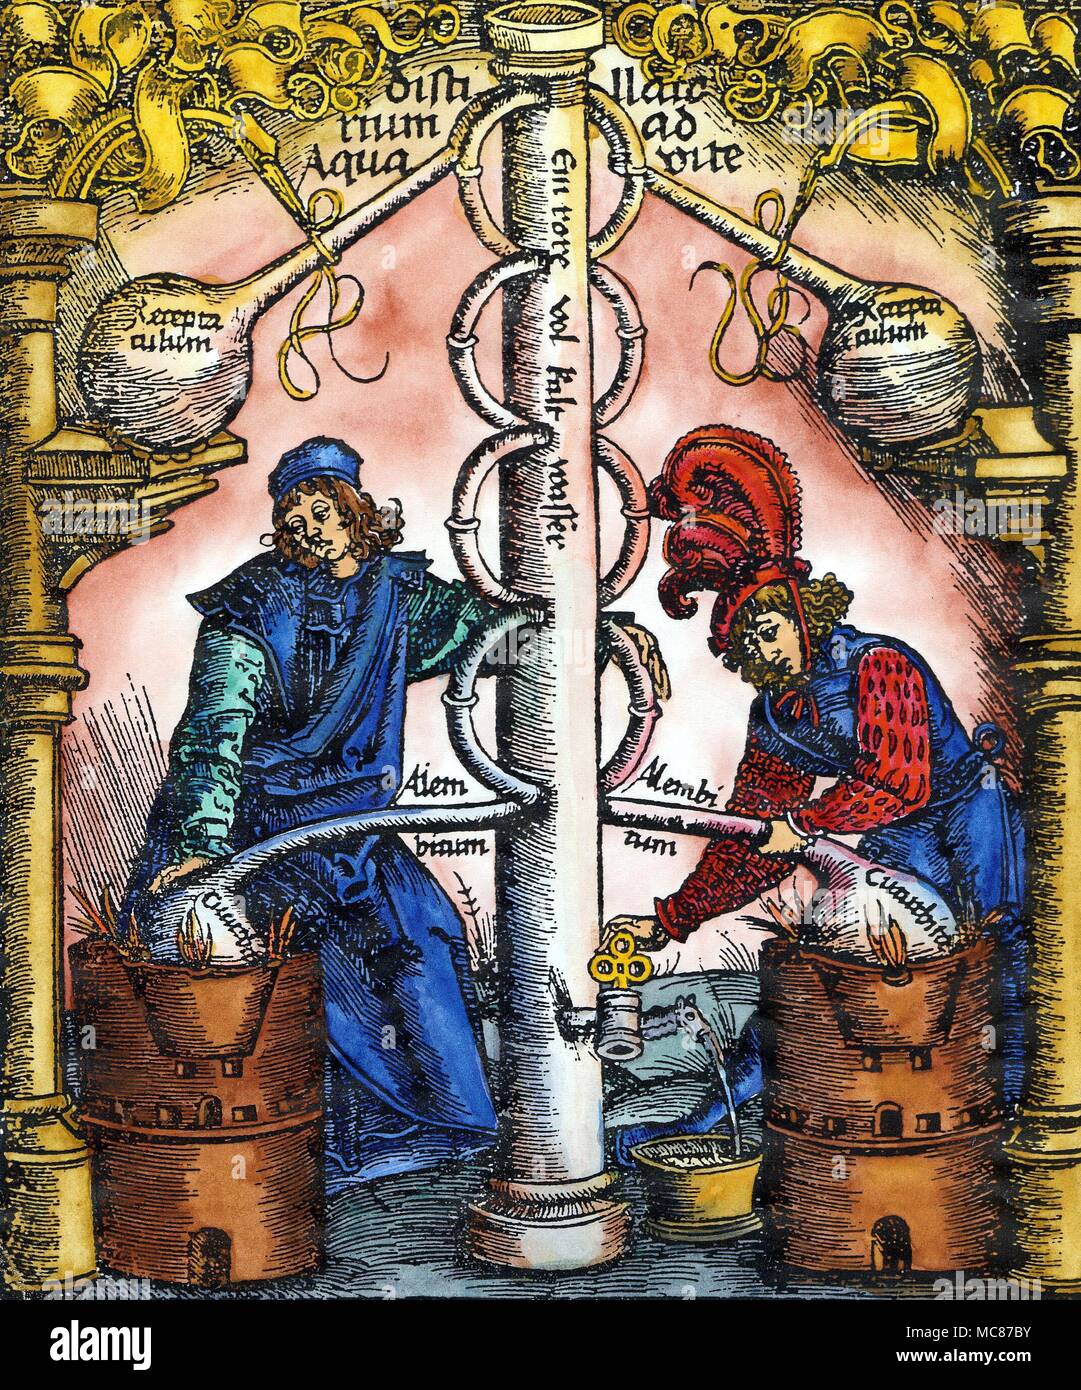 SYMBOLS - KEY - THREE Title-page woodcut to Brunschwig, Das Buch zu Distilieren, 1532. The two chemists or alchemists appear to be distilling Aqua Vita, but the most important symbols in this intriguing illustration is the key to the spout, being operated by the alchemist towards the bottom of the picture, to draw off some of the distilled liquid. The key is made of three circles - a clear reference to the Trinity, and a reminder that the alchemists regarded all their operations as being under the licit control of God. This trinity symbol was reflected in the alchemical image of Man, who w Stock Photo